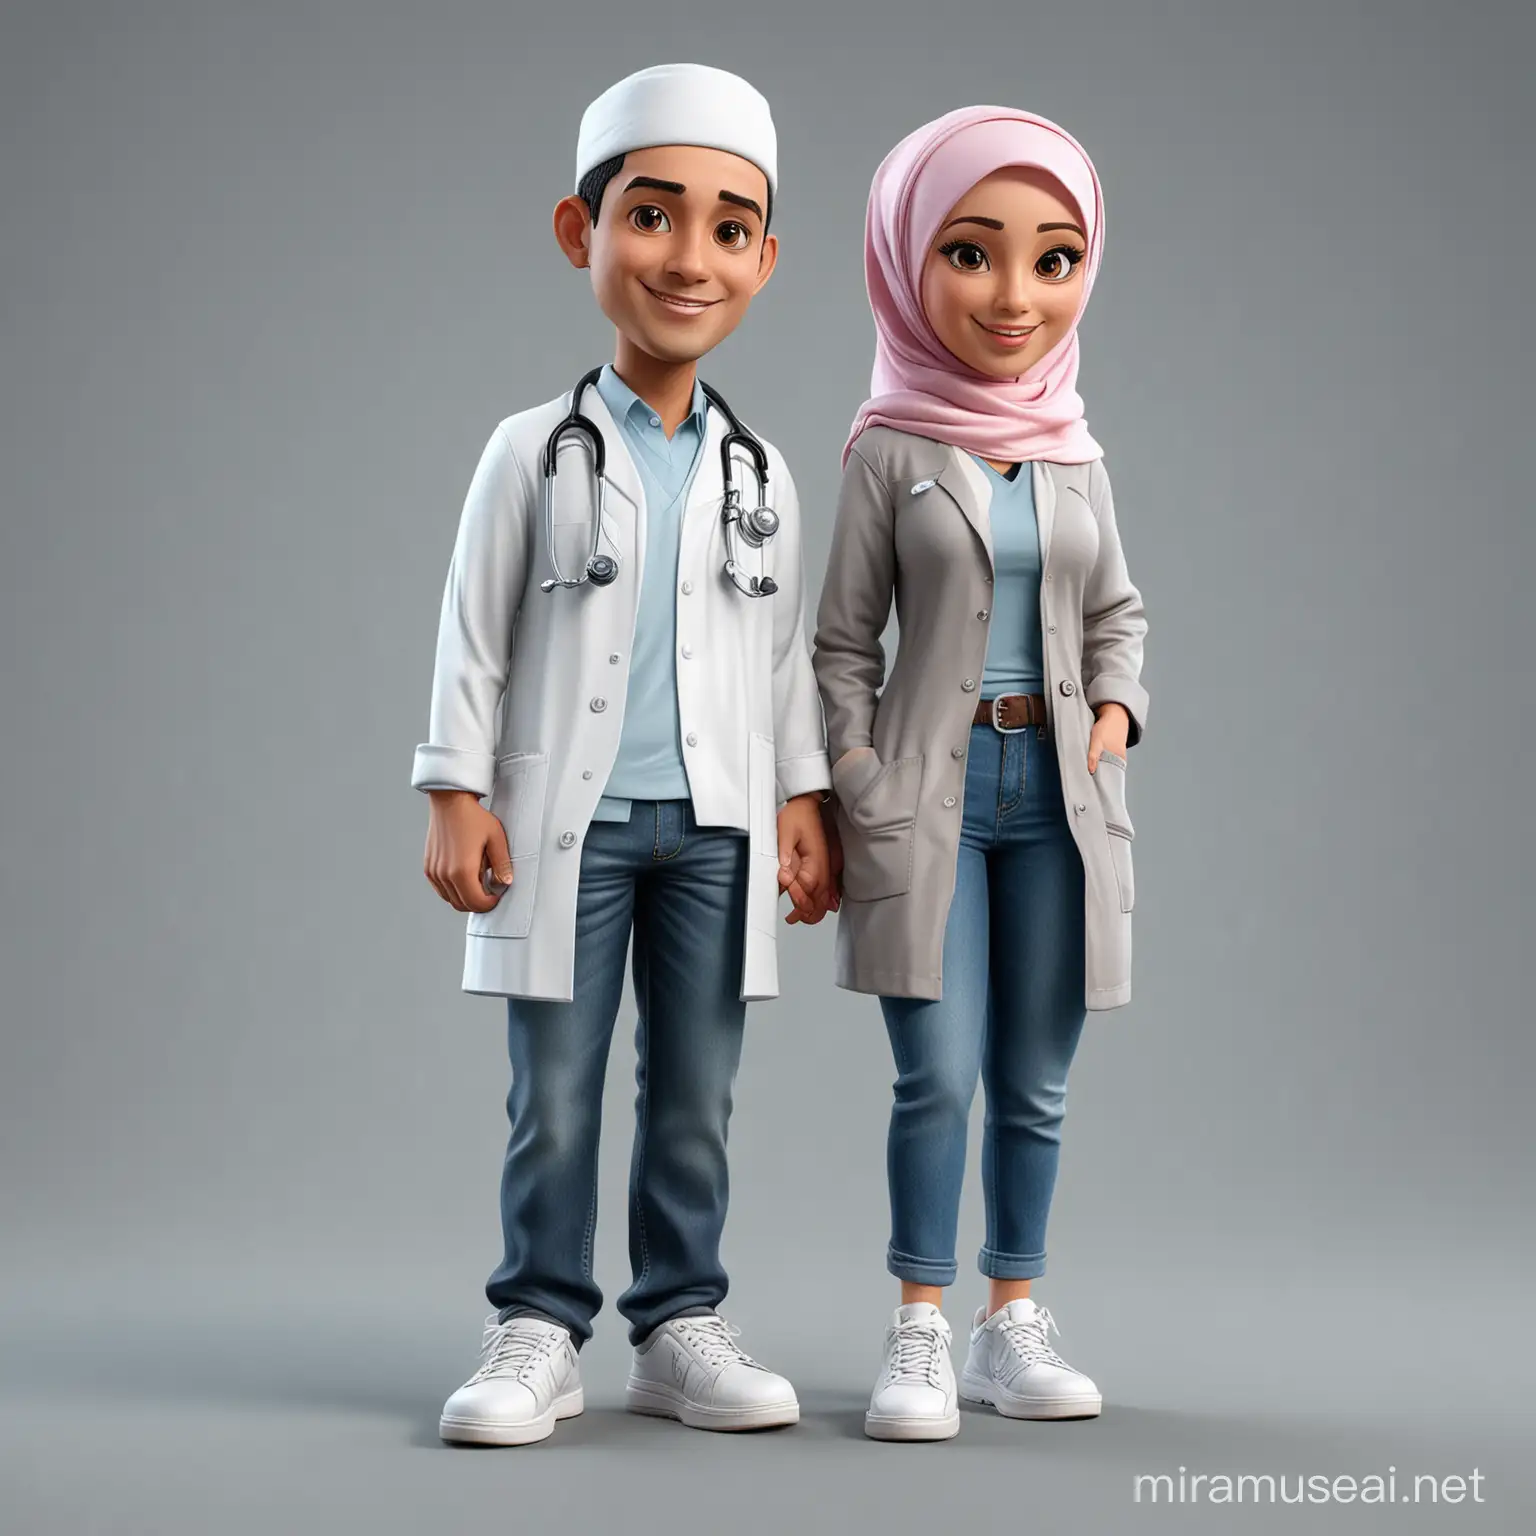 Photo realistic caricature 3d cartoon render, of a doctor couple. one beautiful Indonesian Muslim woman, slightly chubby, Wear hijab with doctor uniform complete with white sneakers and one Muslim man, wear doctor uniform, denim jeans and leather shoes.